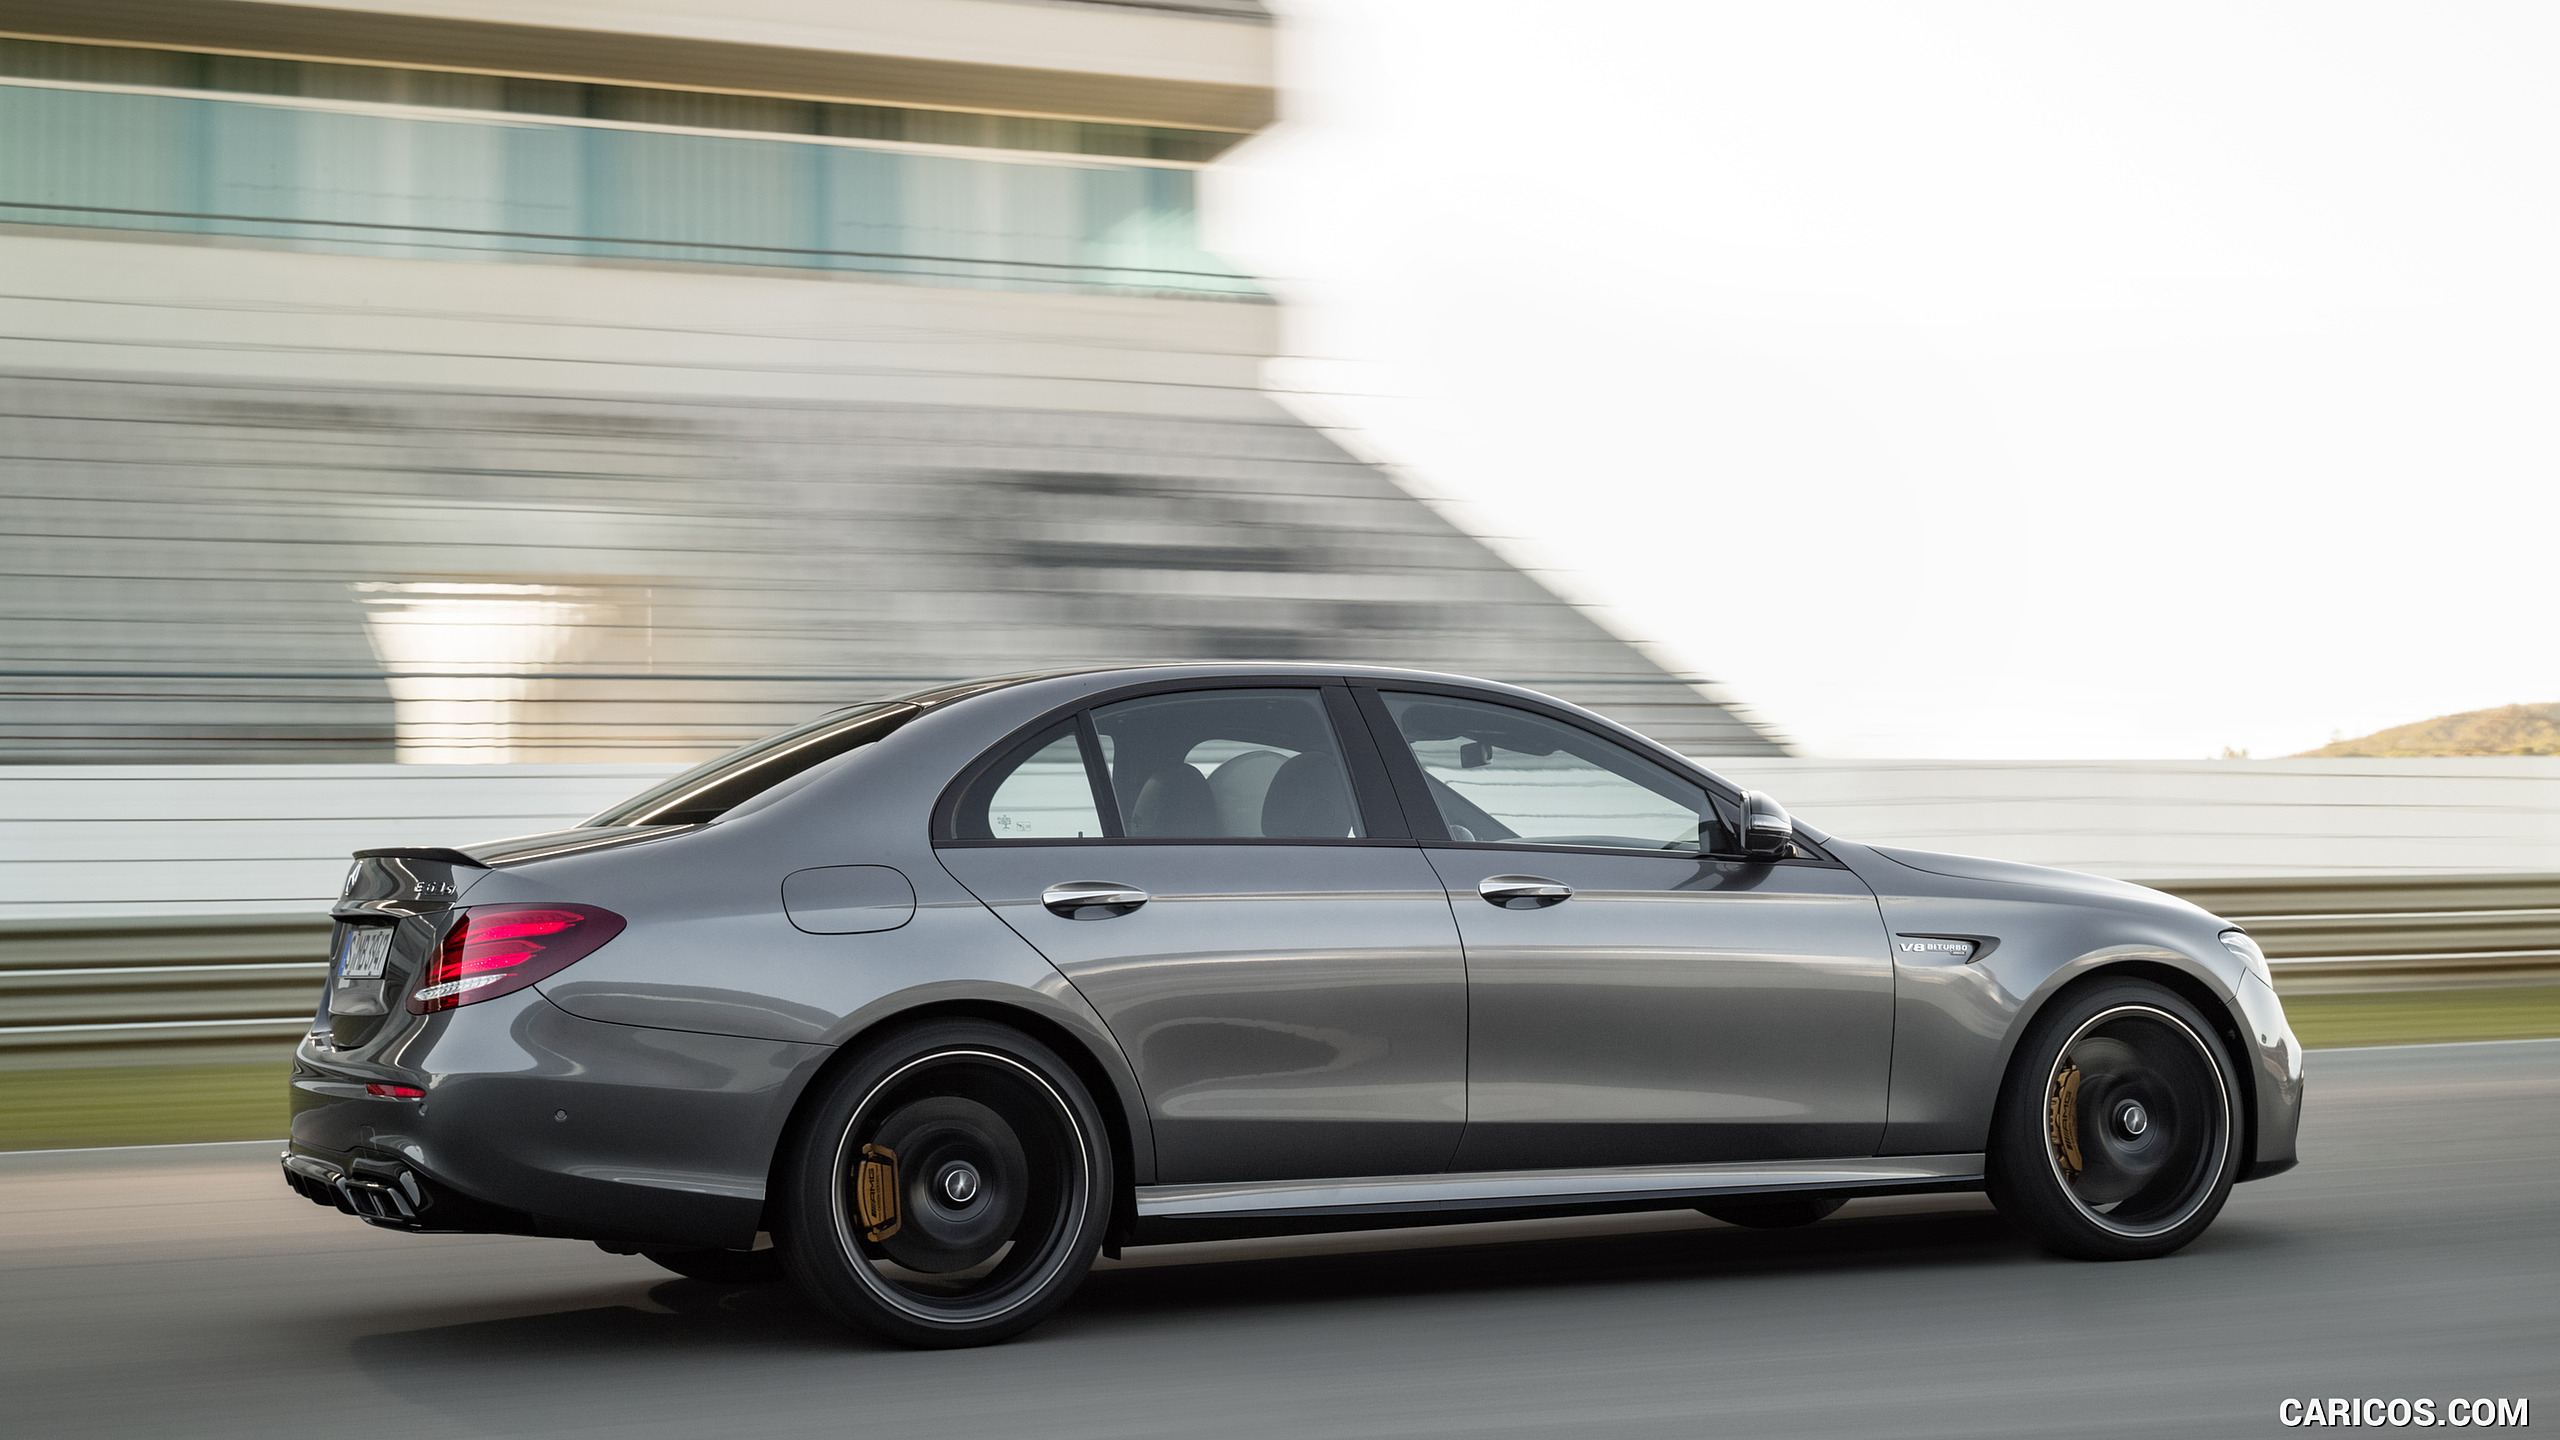 2018 Mercedes-AMG E63 S 4MATIC+ - Side, #17 of 323